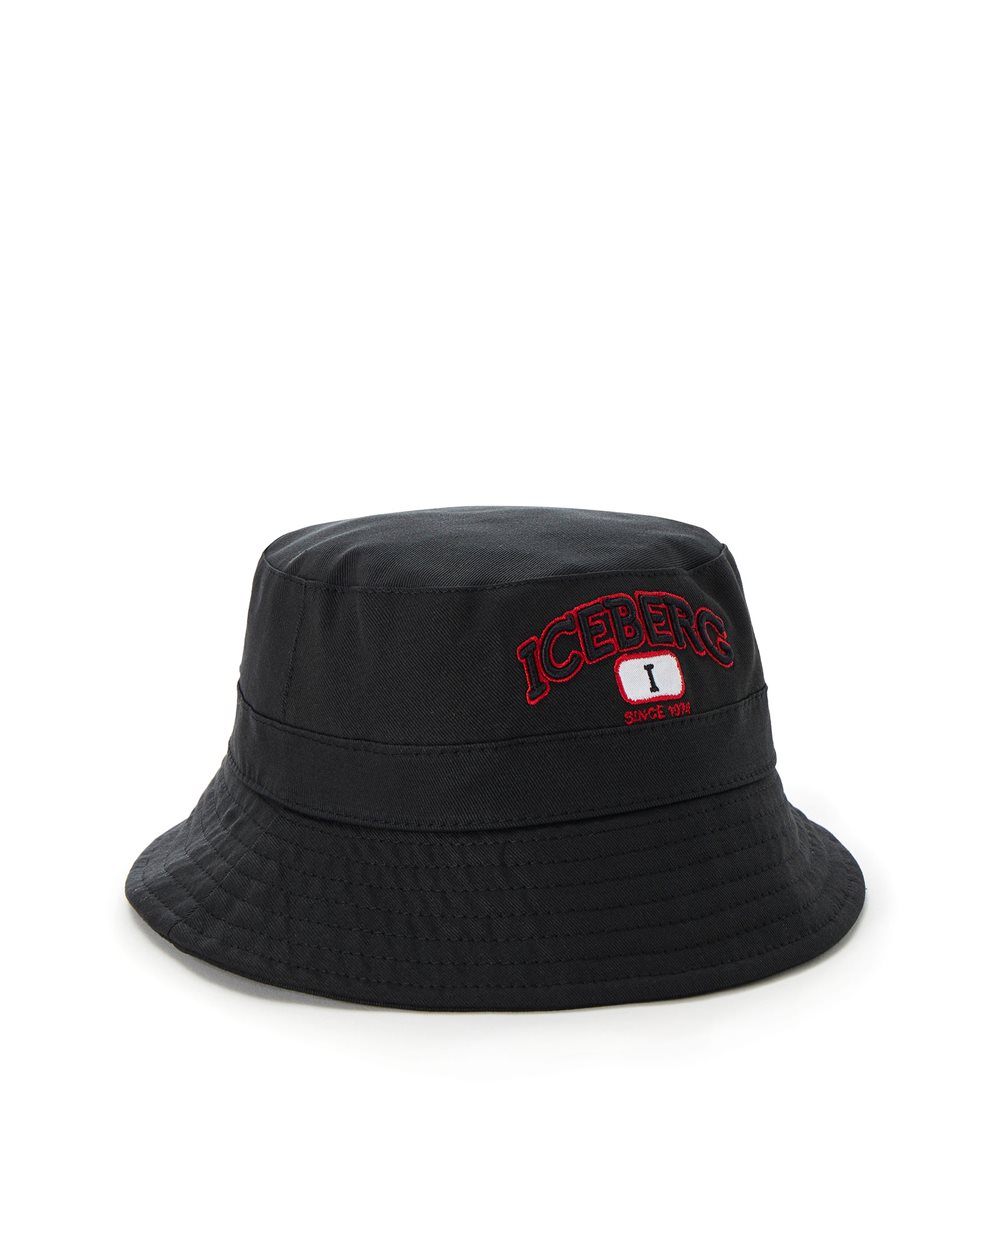 Bucket hat with logo - GIFT GUIDE  | Iceberg - Official Website